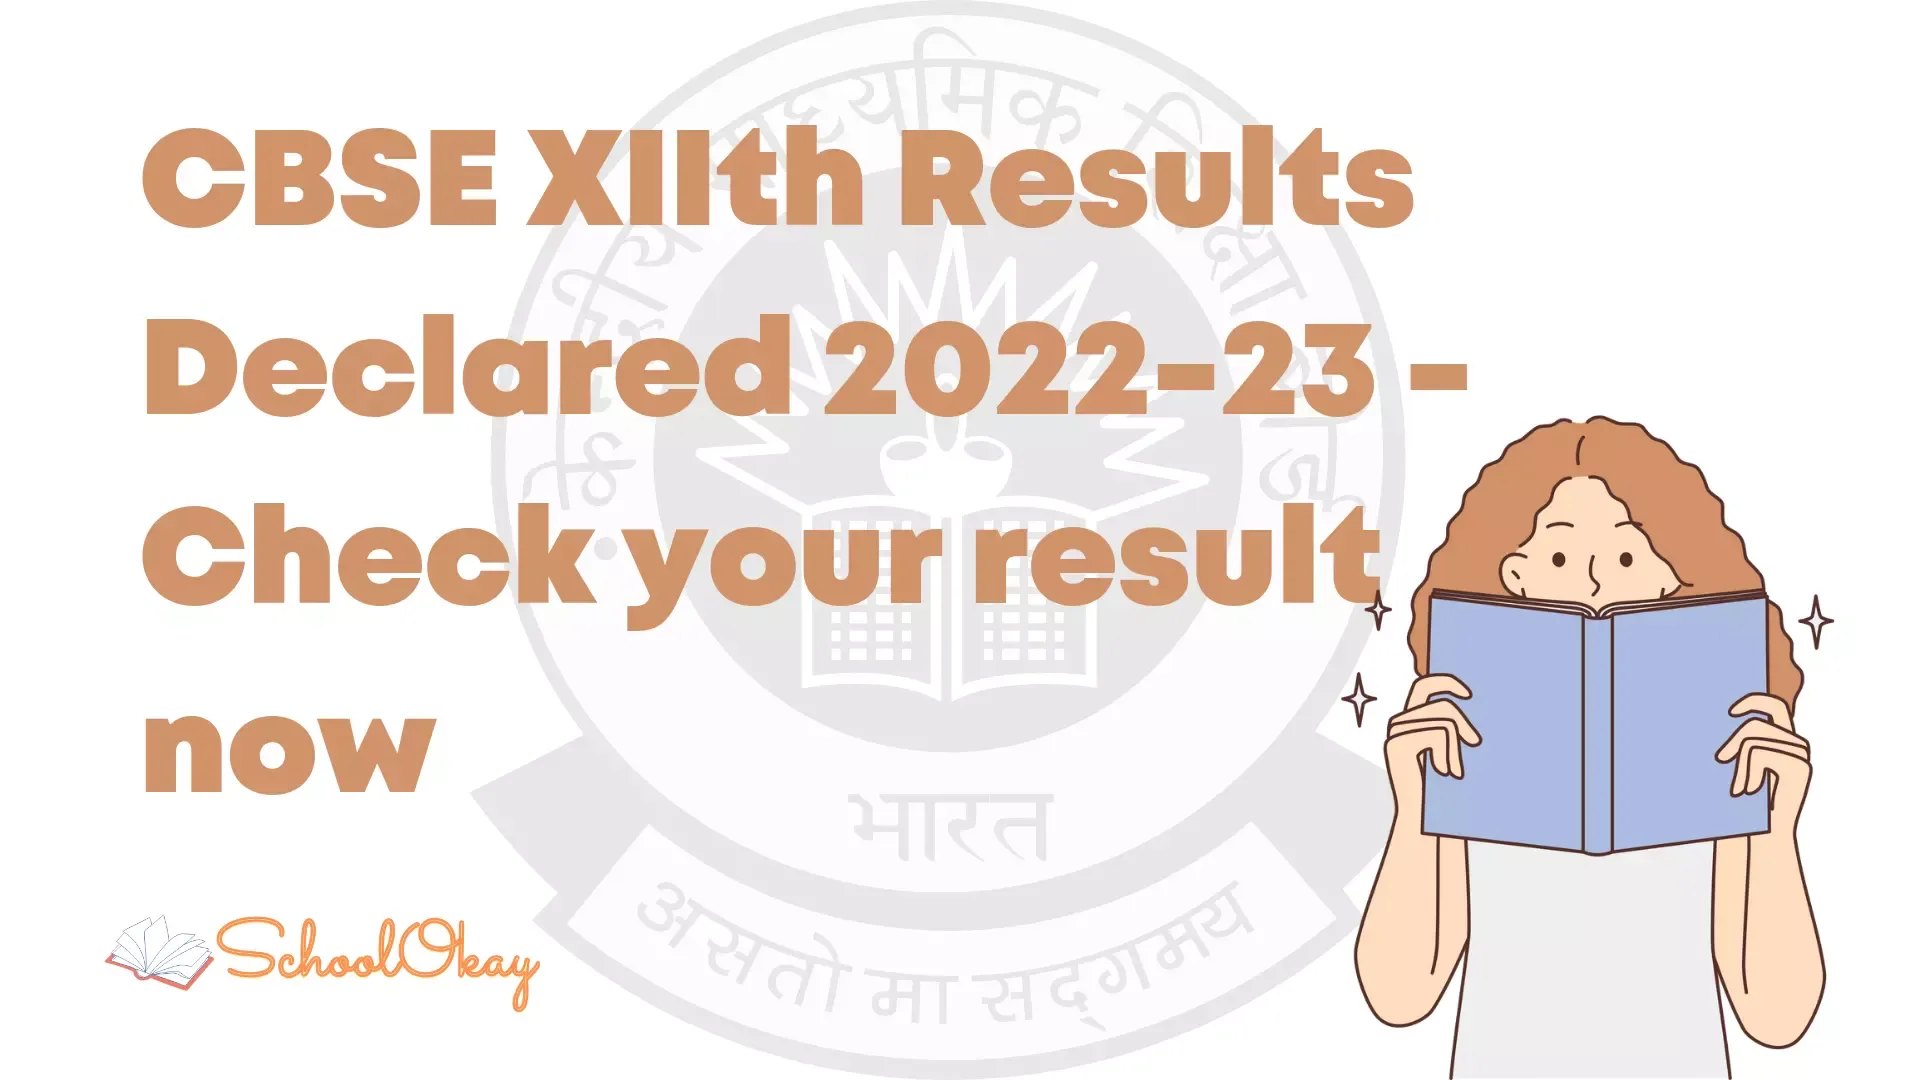 CBSE Class 12th Results Declared 2022-23 - Check your result now